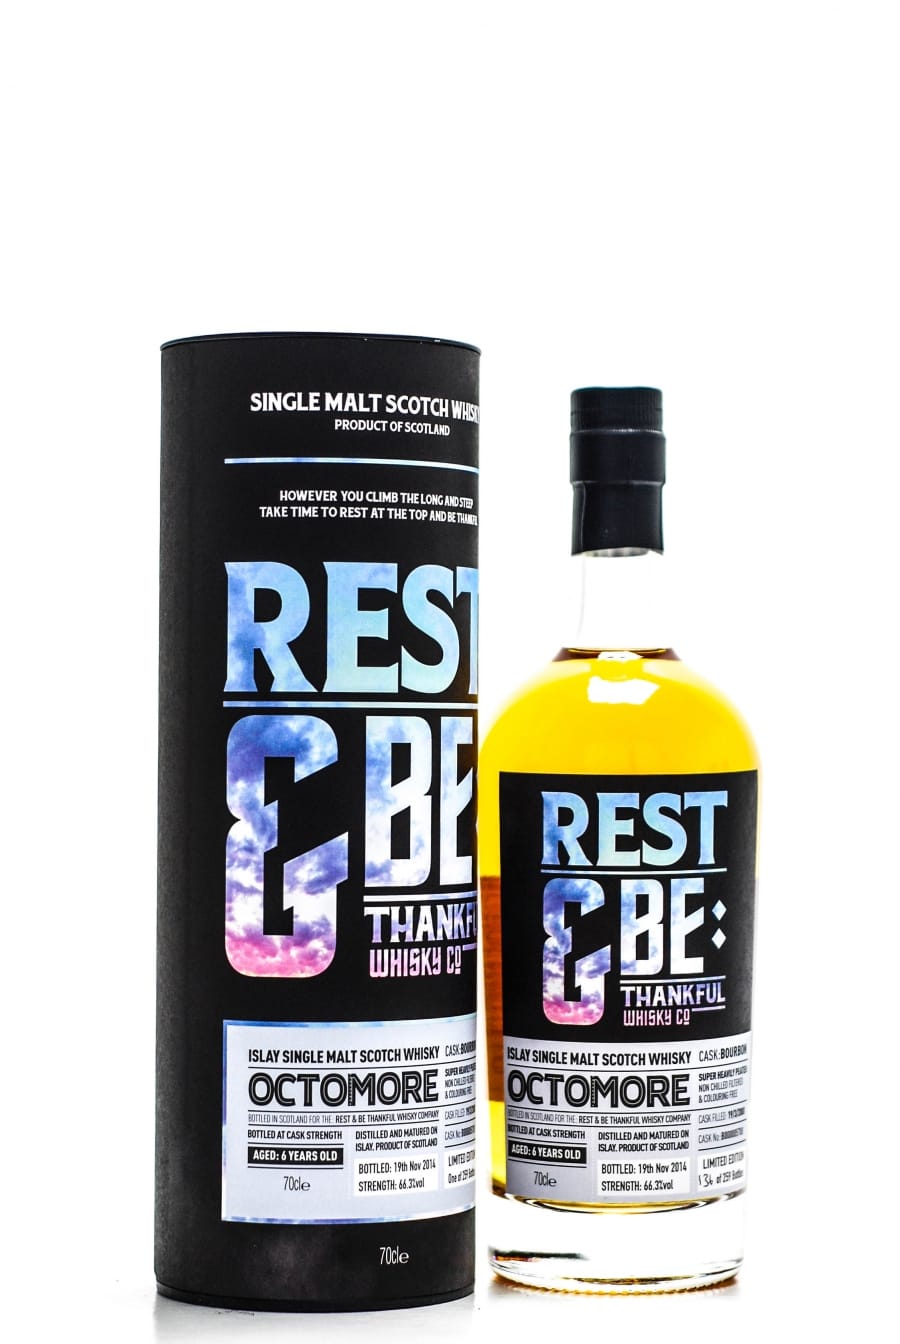 Bruichladdich - Octomore 6 Years Old Rest & be Thankful Whisky Company Cask:B000005708 66.3% 2008